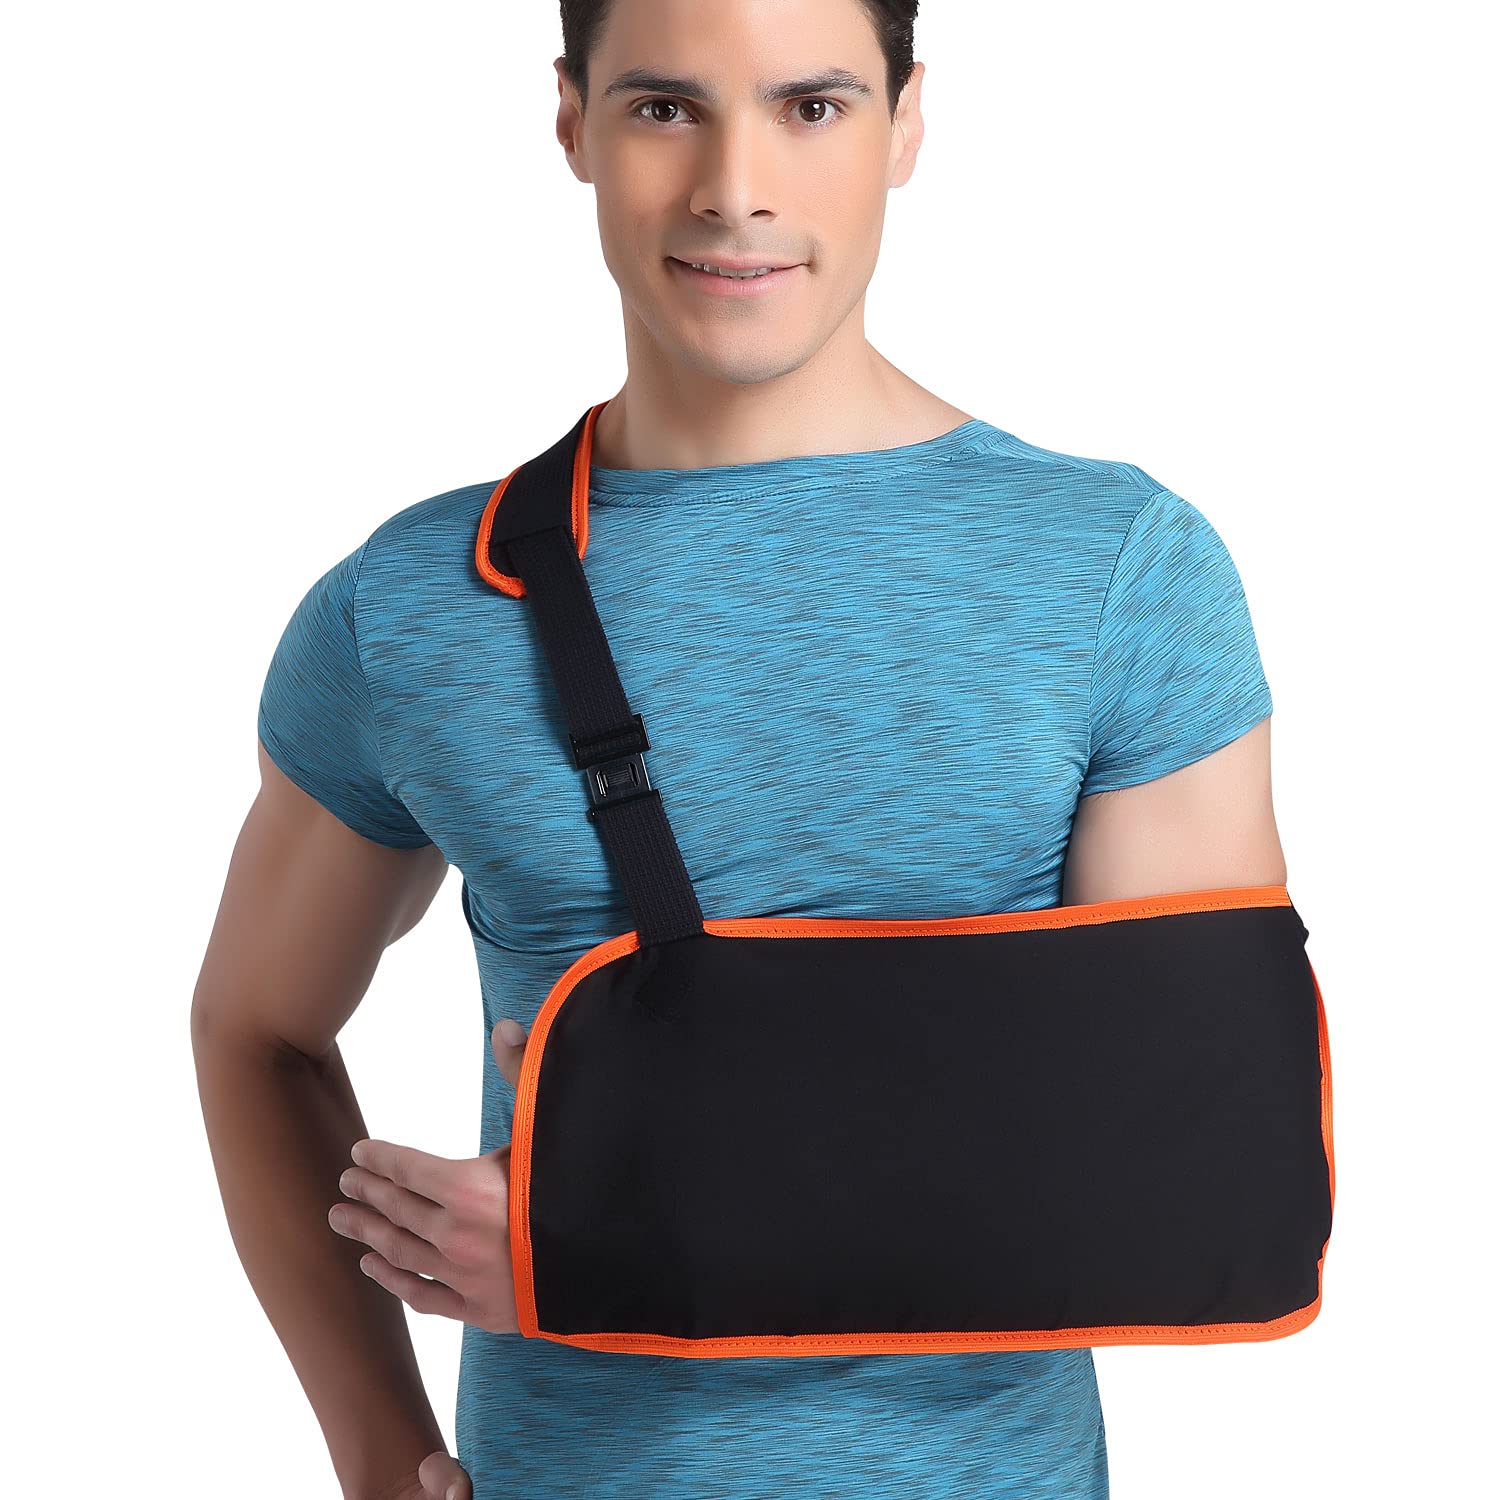 Flamingo Arm Sling Comfortable Velcro for Shoulder & Arm Cushion Support Better fit | Smart & Sleek | Highly Durable | 100% Polyester | Provides Support to fractured arm | Men and Women (Black, XL)